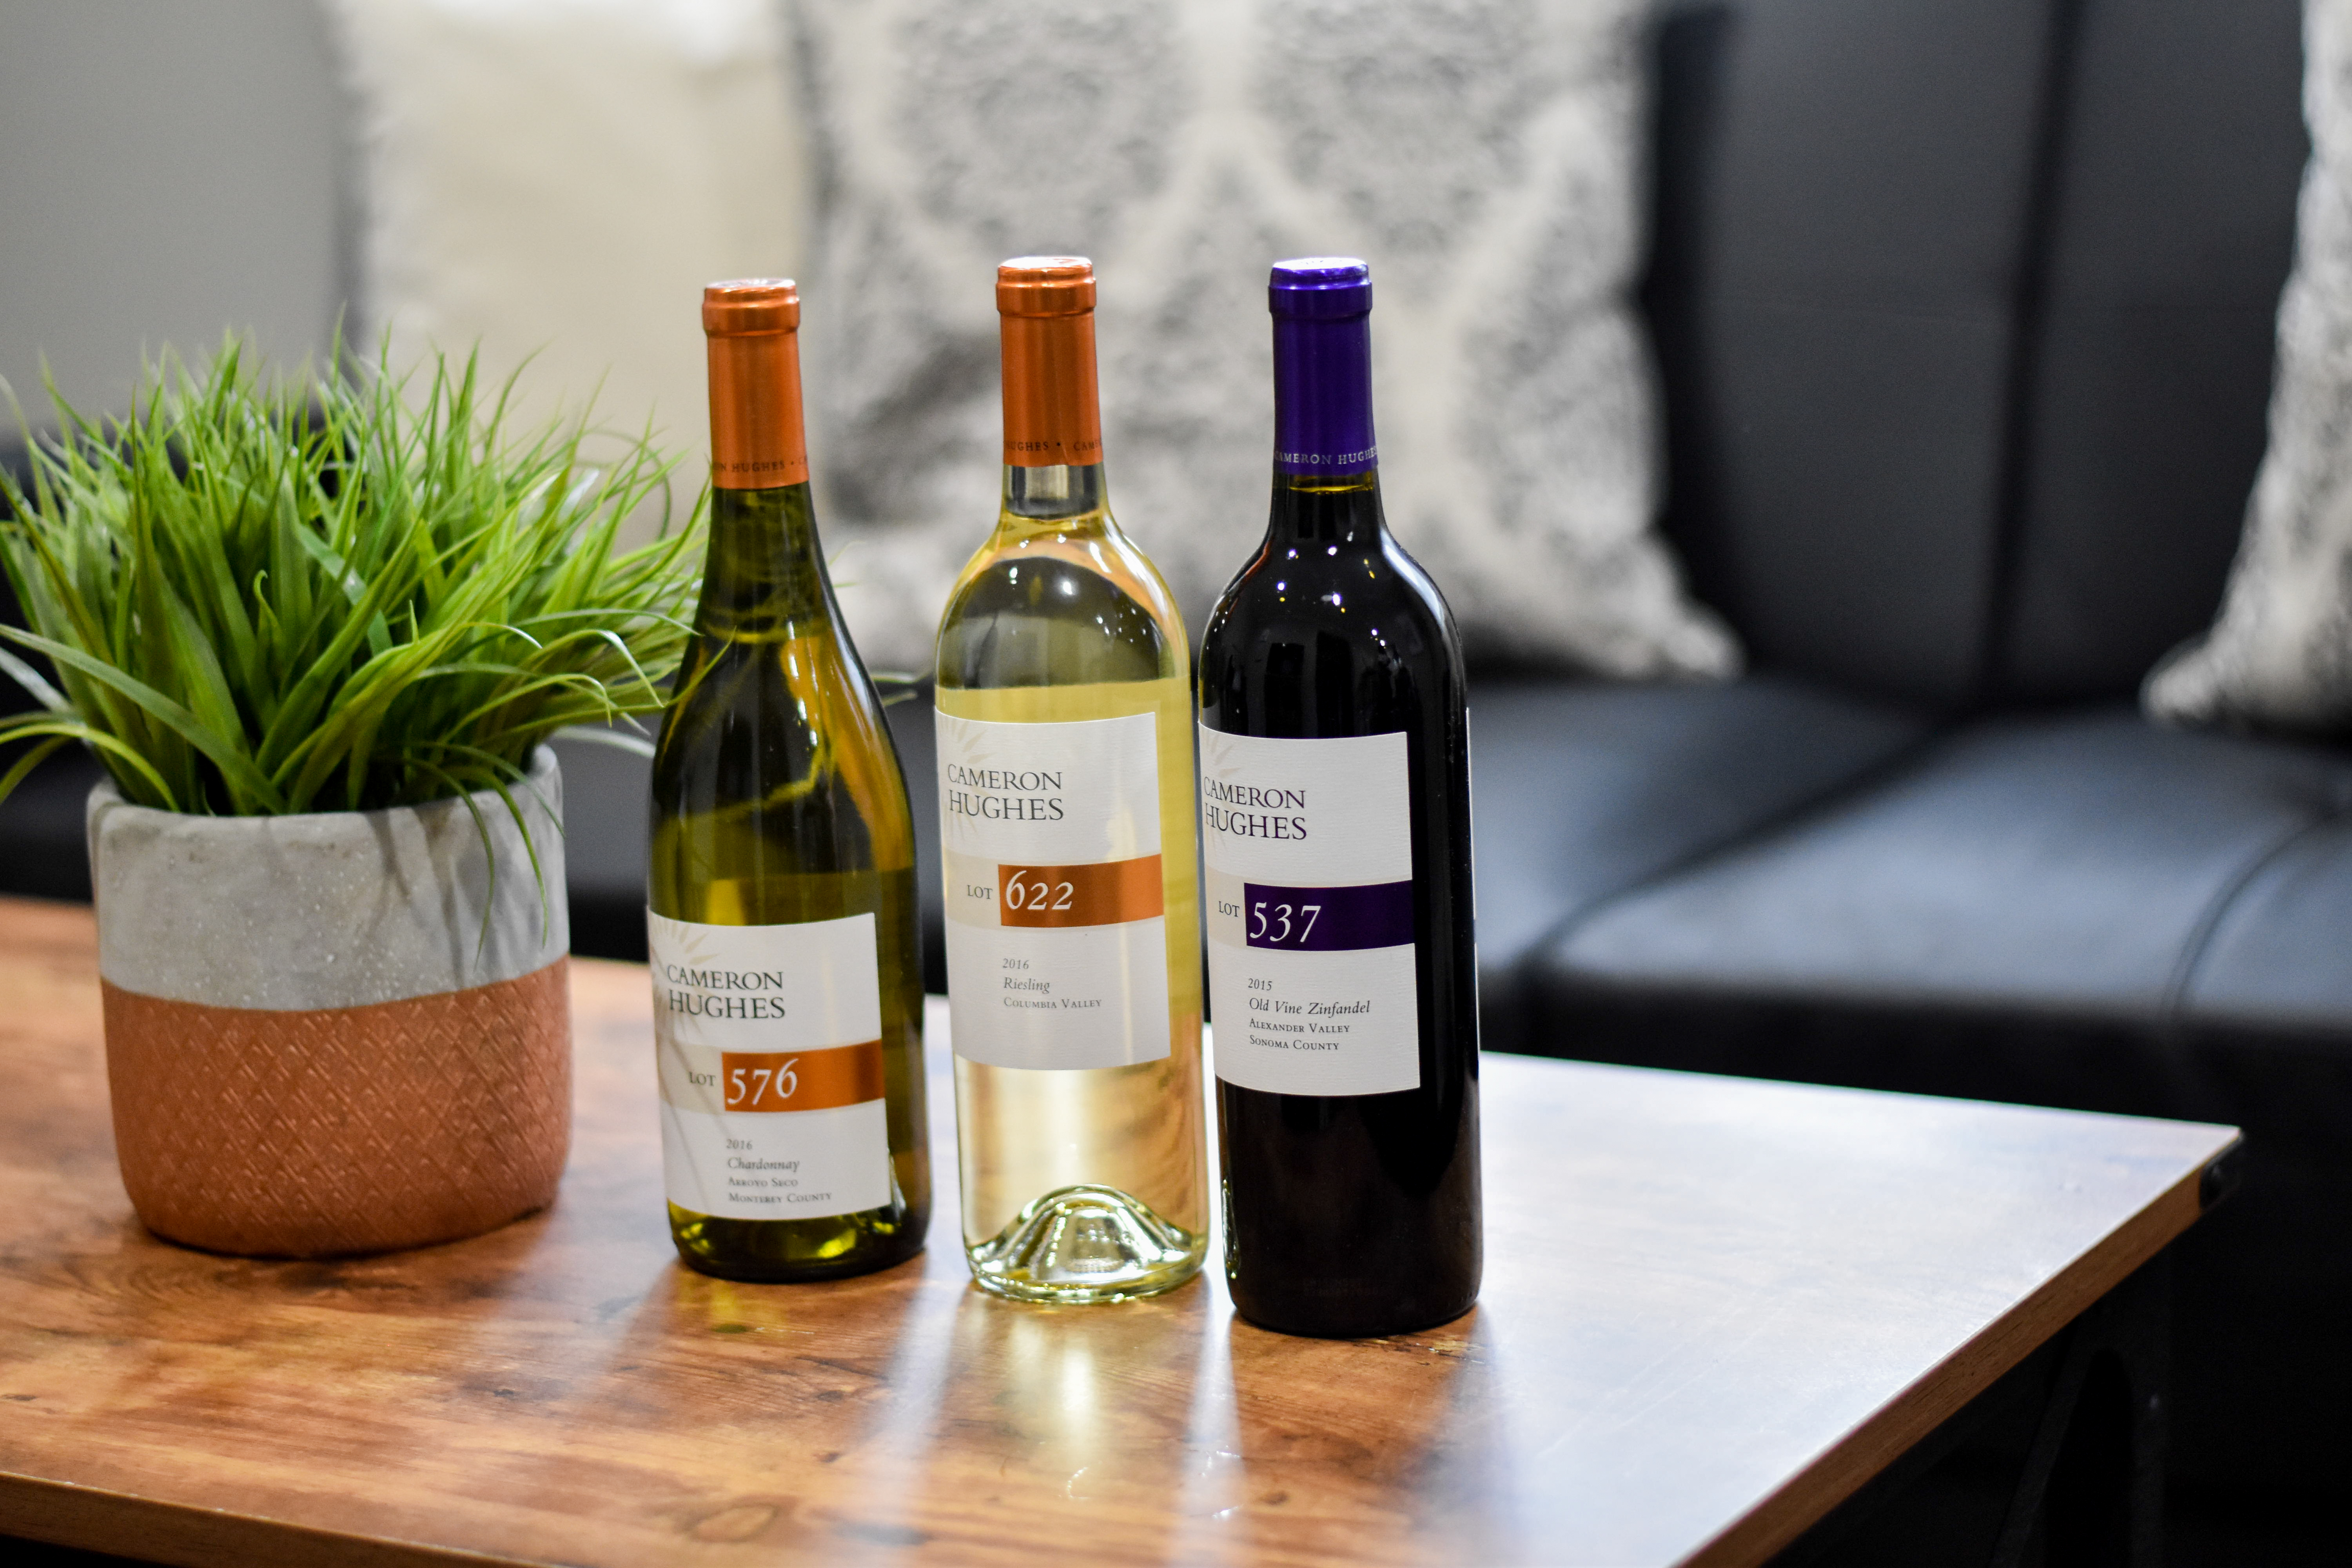 Three bottles of Cameron Hughes wine on a wood table